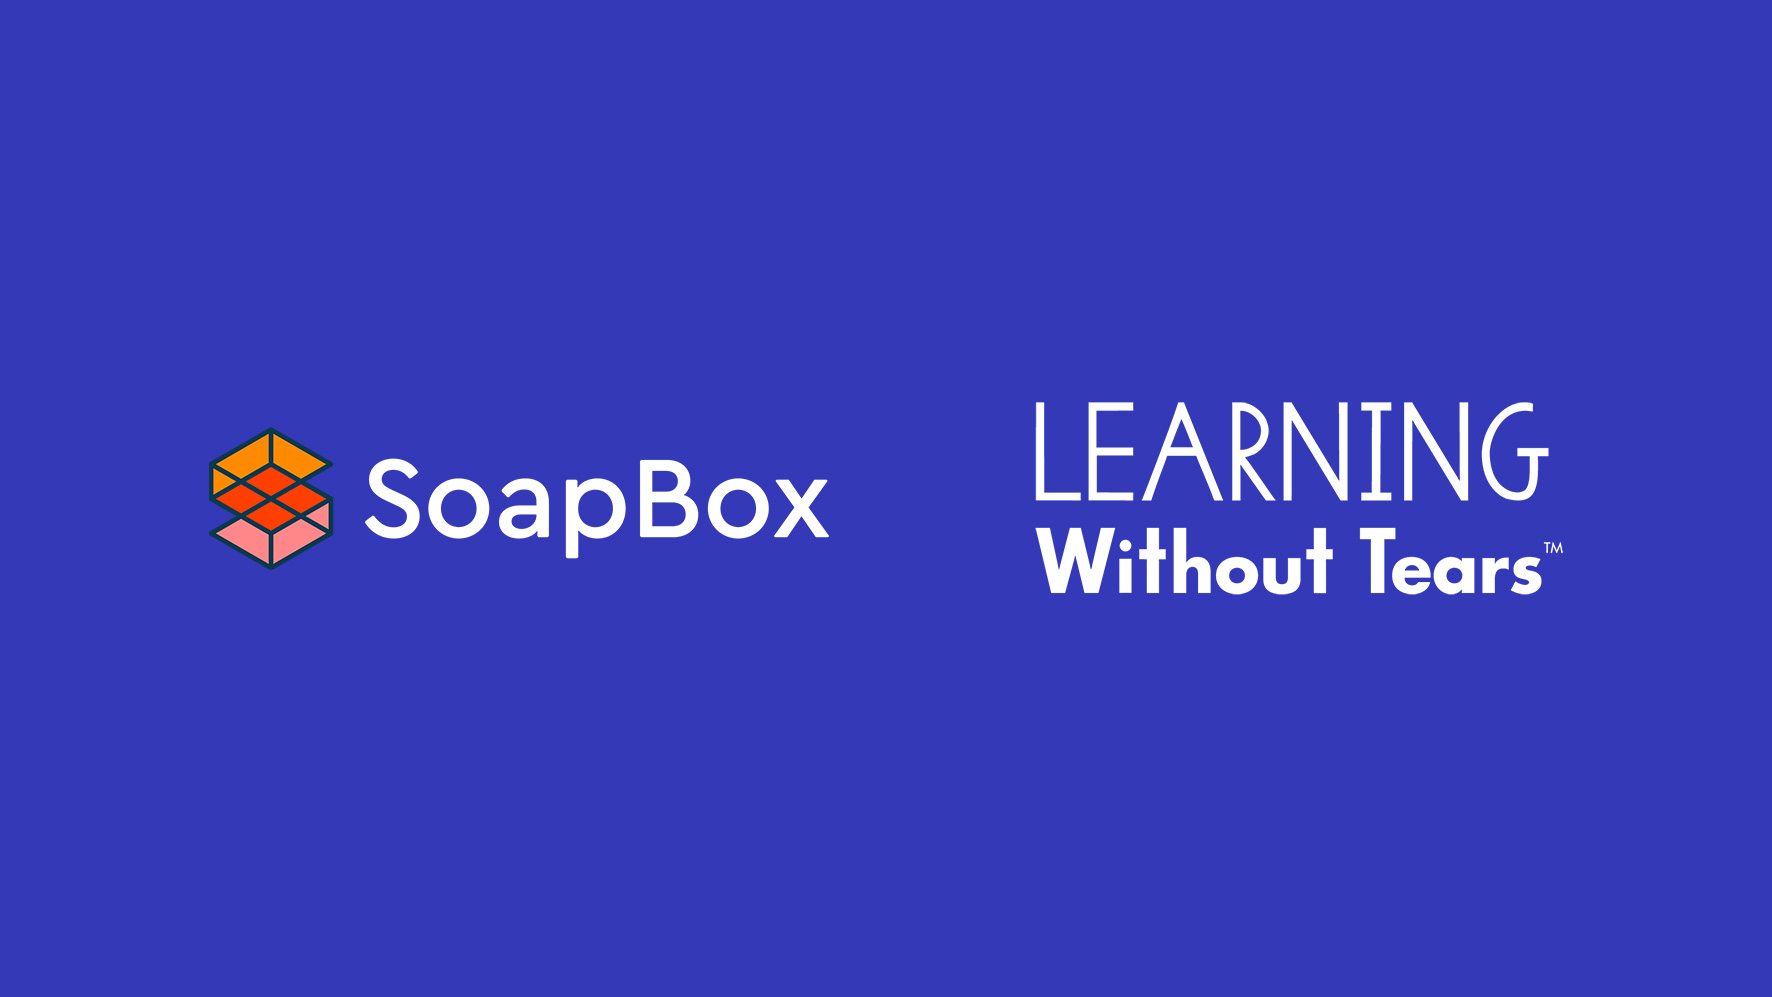 An image of the SoapBox and Learning Without Tears logos